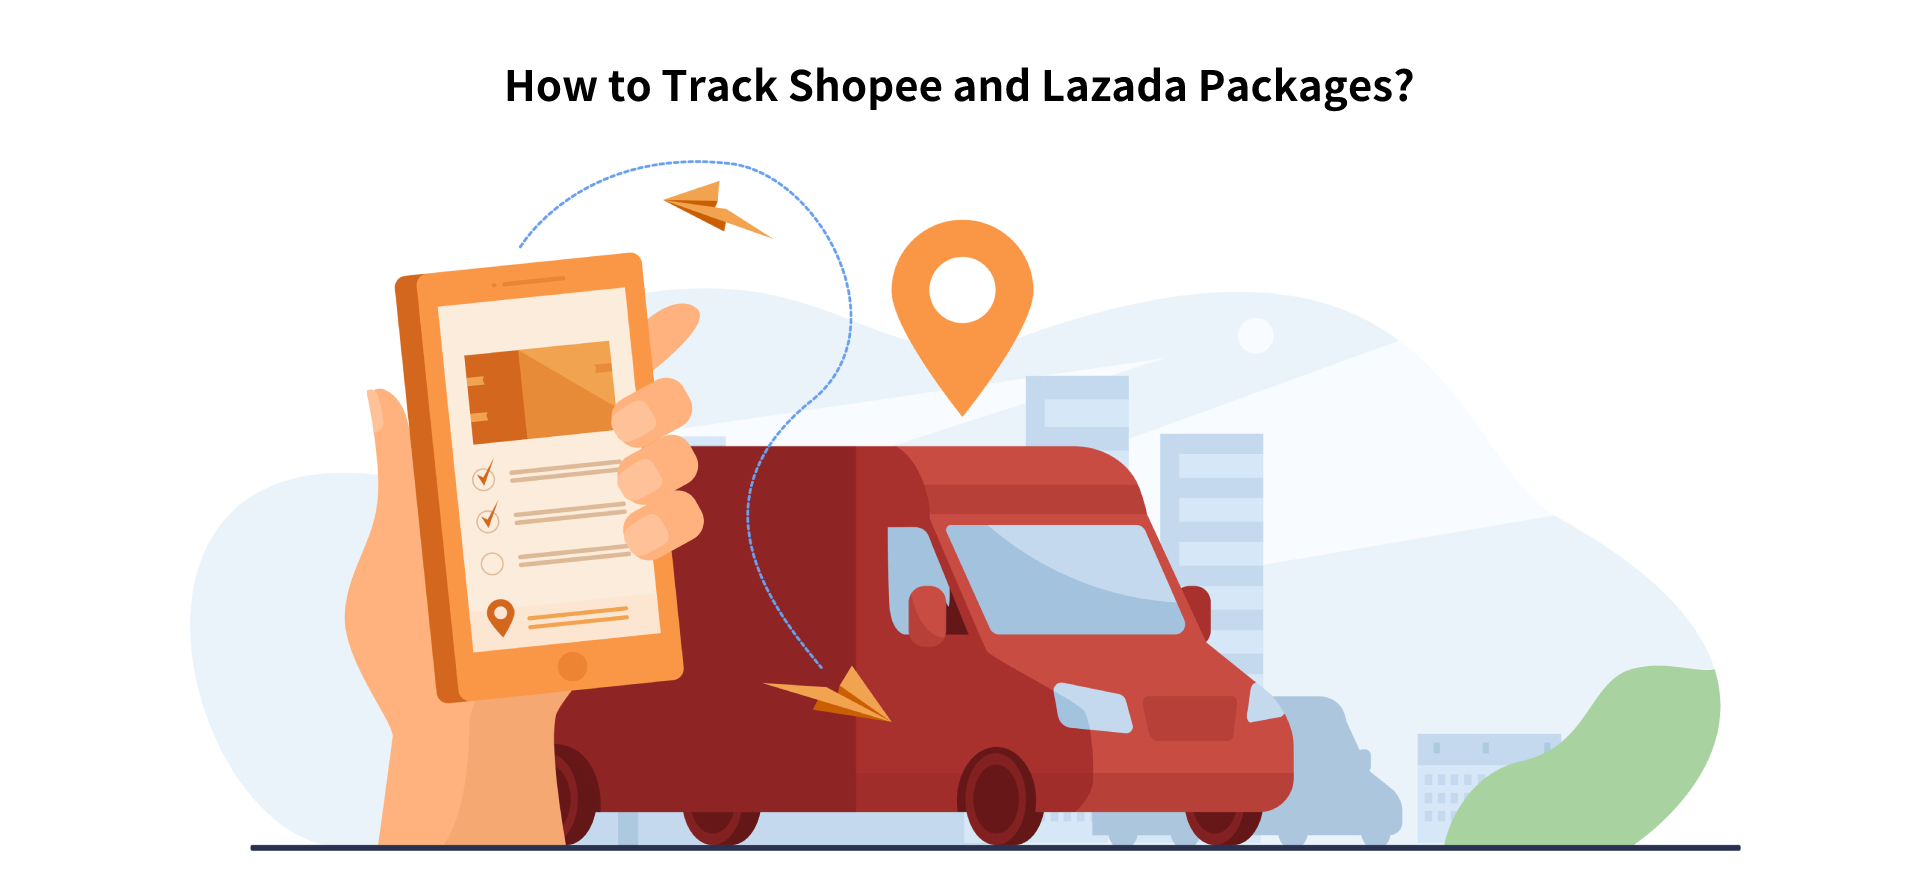 How to Track Shopee and Lazada Packages?